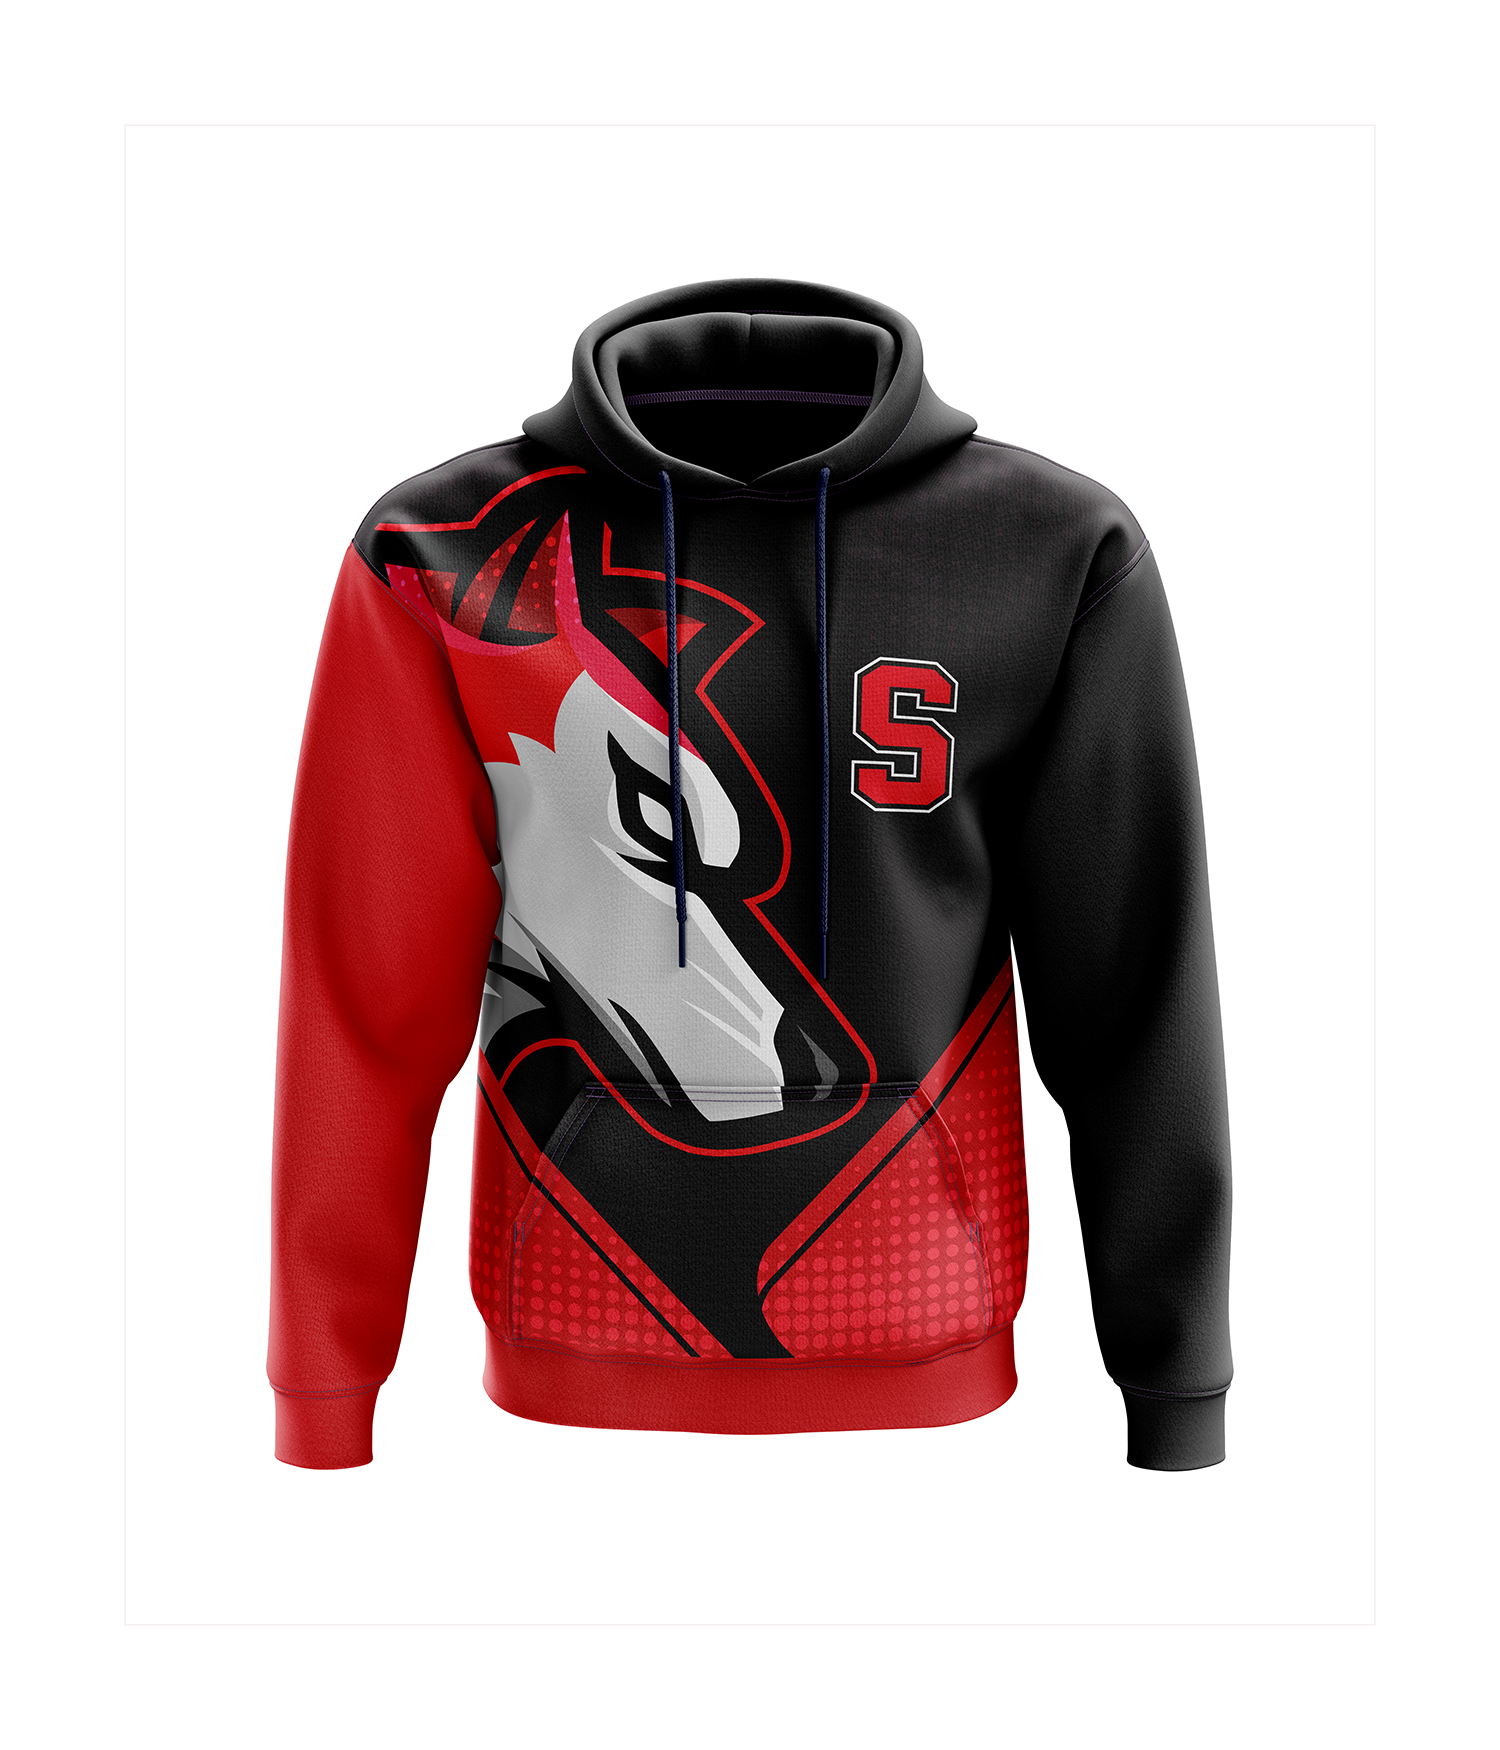 Exclusive SHAW Timberwolves 2021 Hoodie| Customize Yours Now